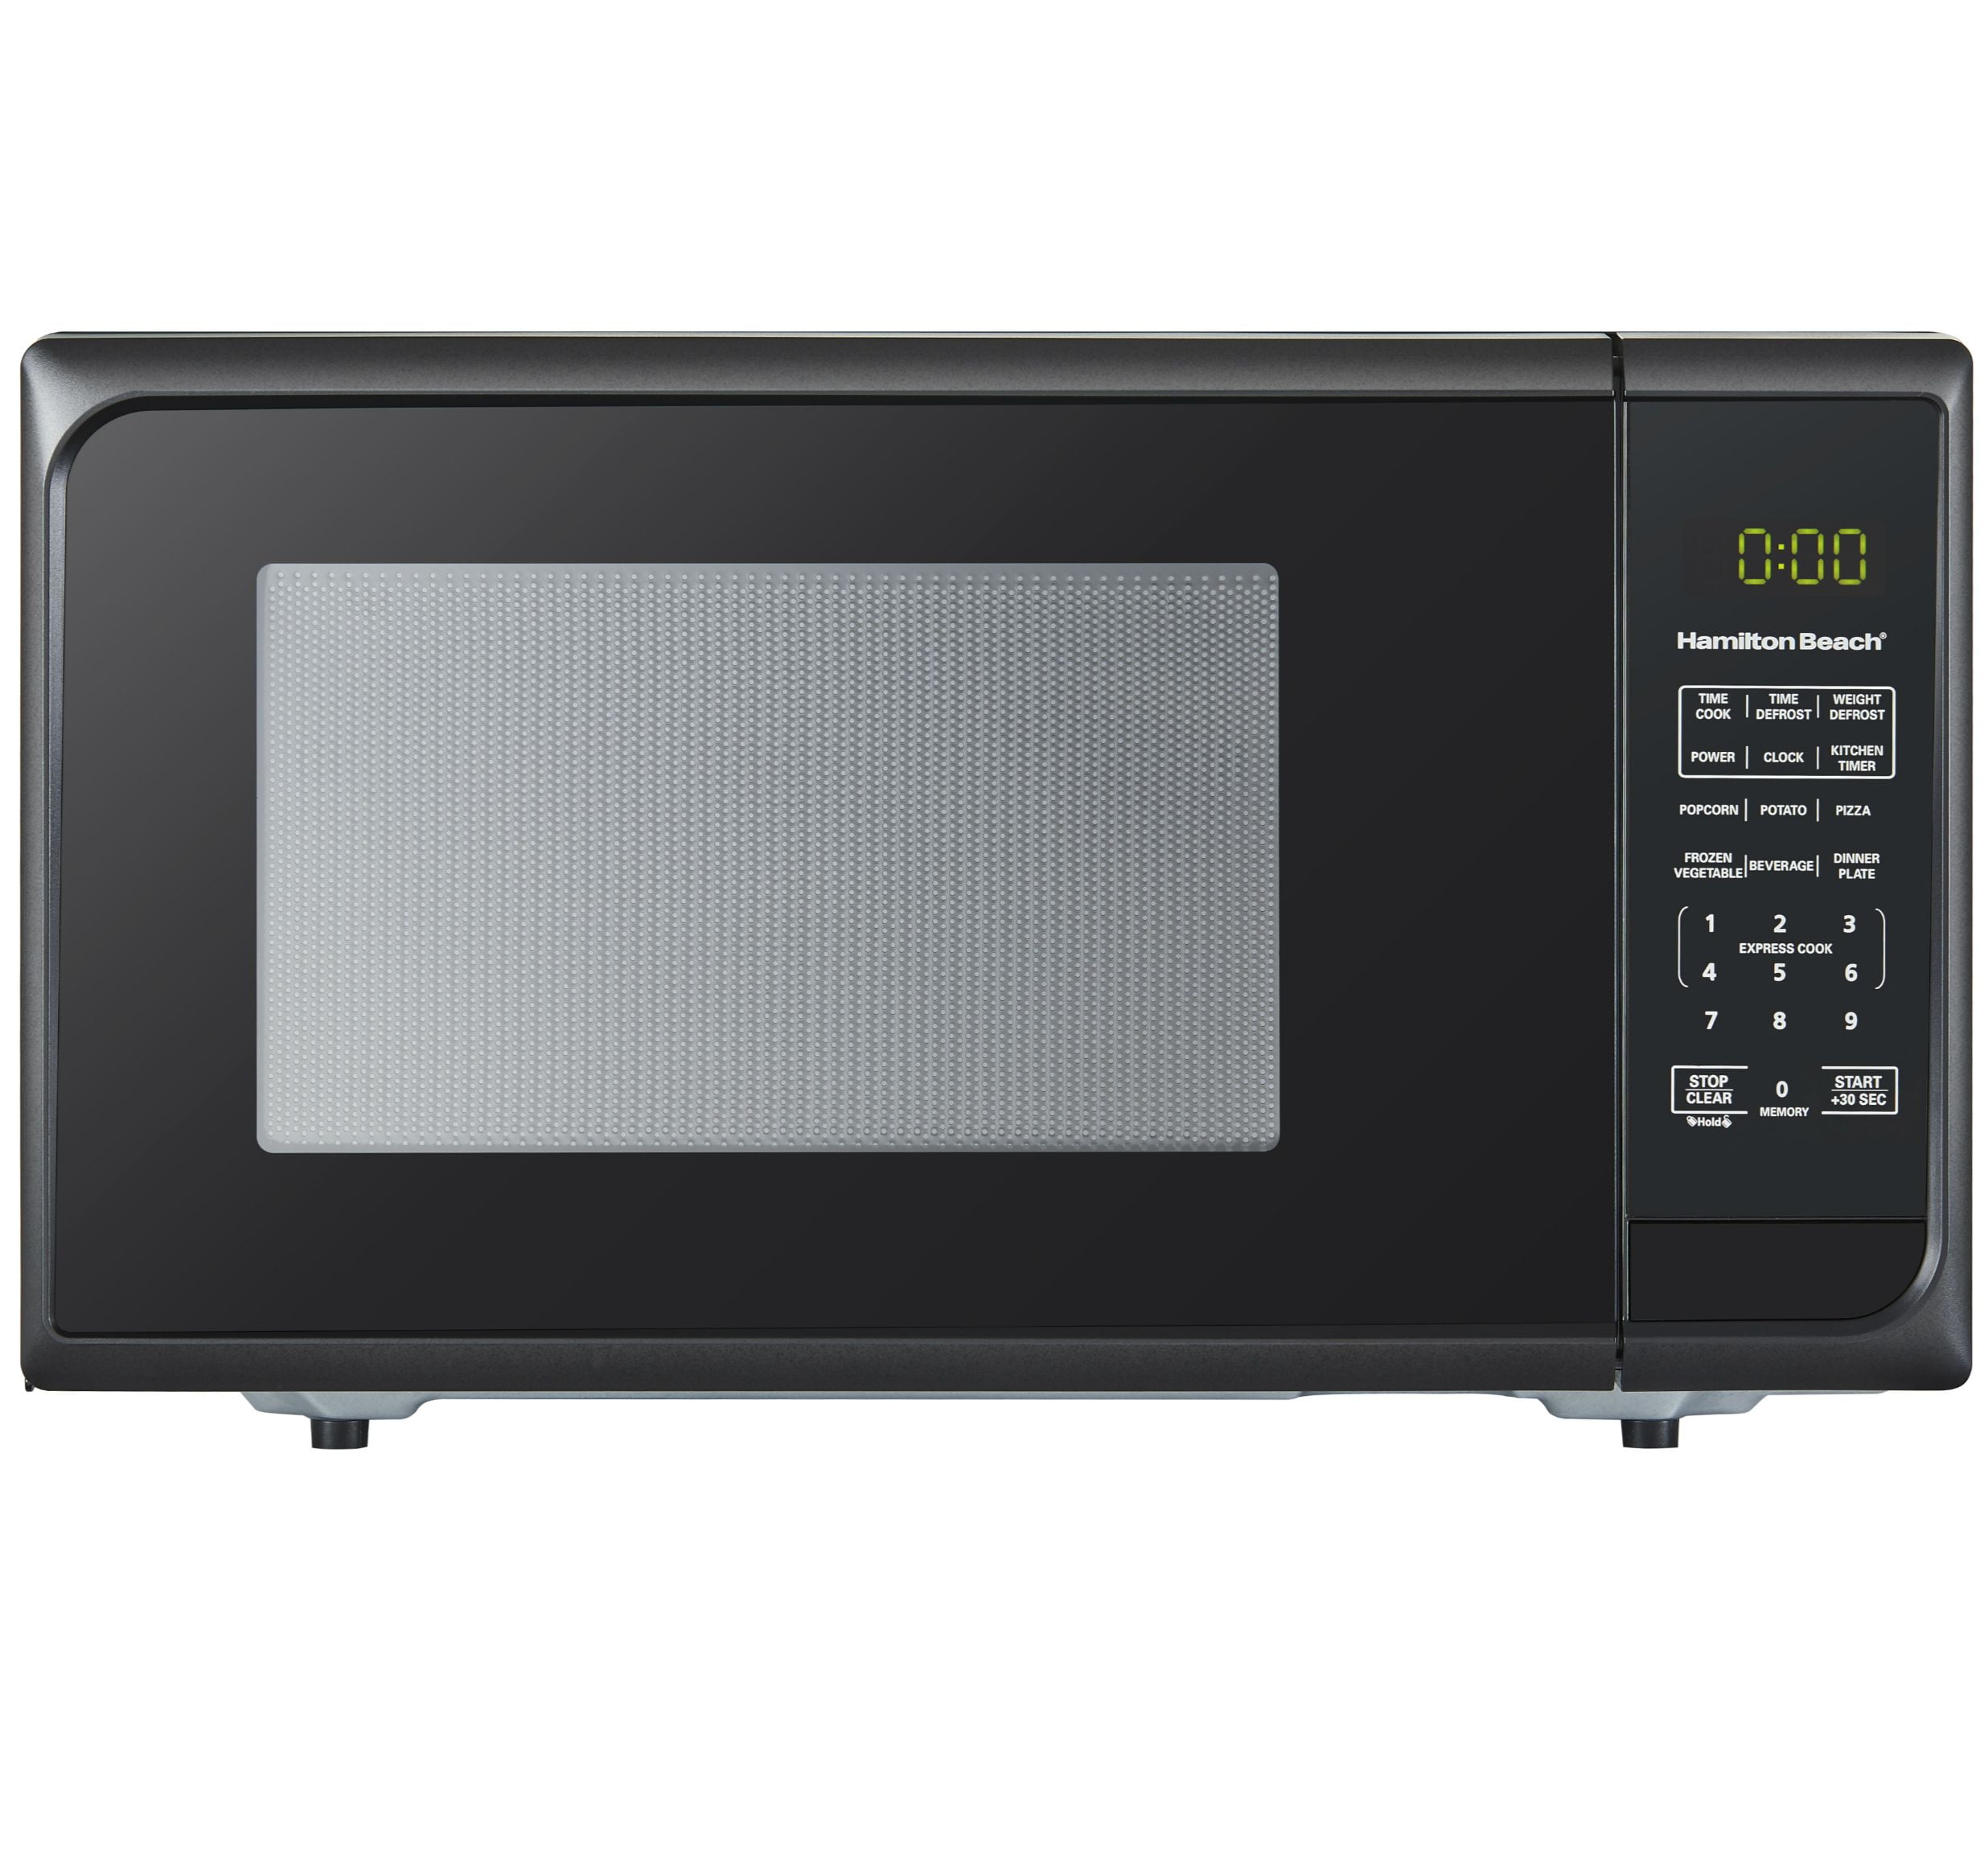 Insignia NS-MW09BK0 0.9 Cu Ft Black for sale online Countertop Microwave 